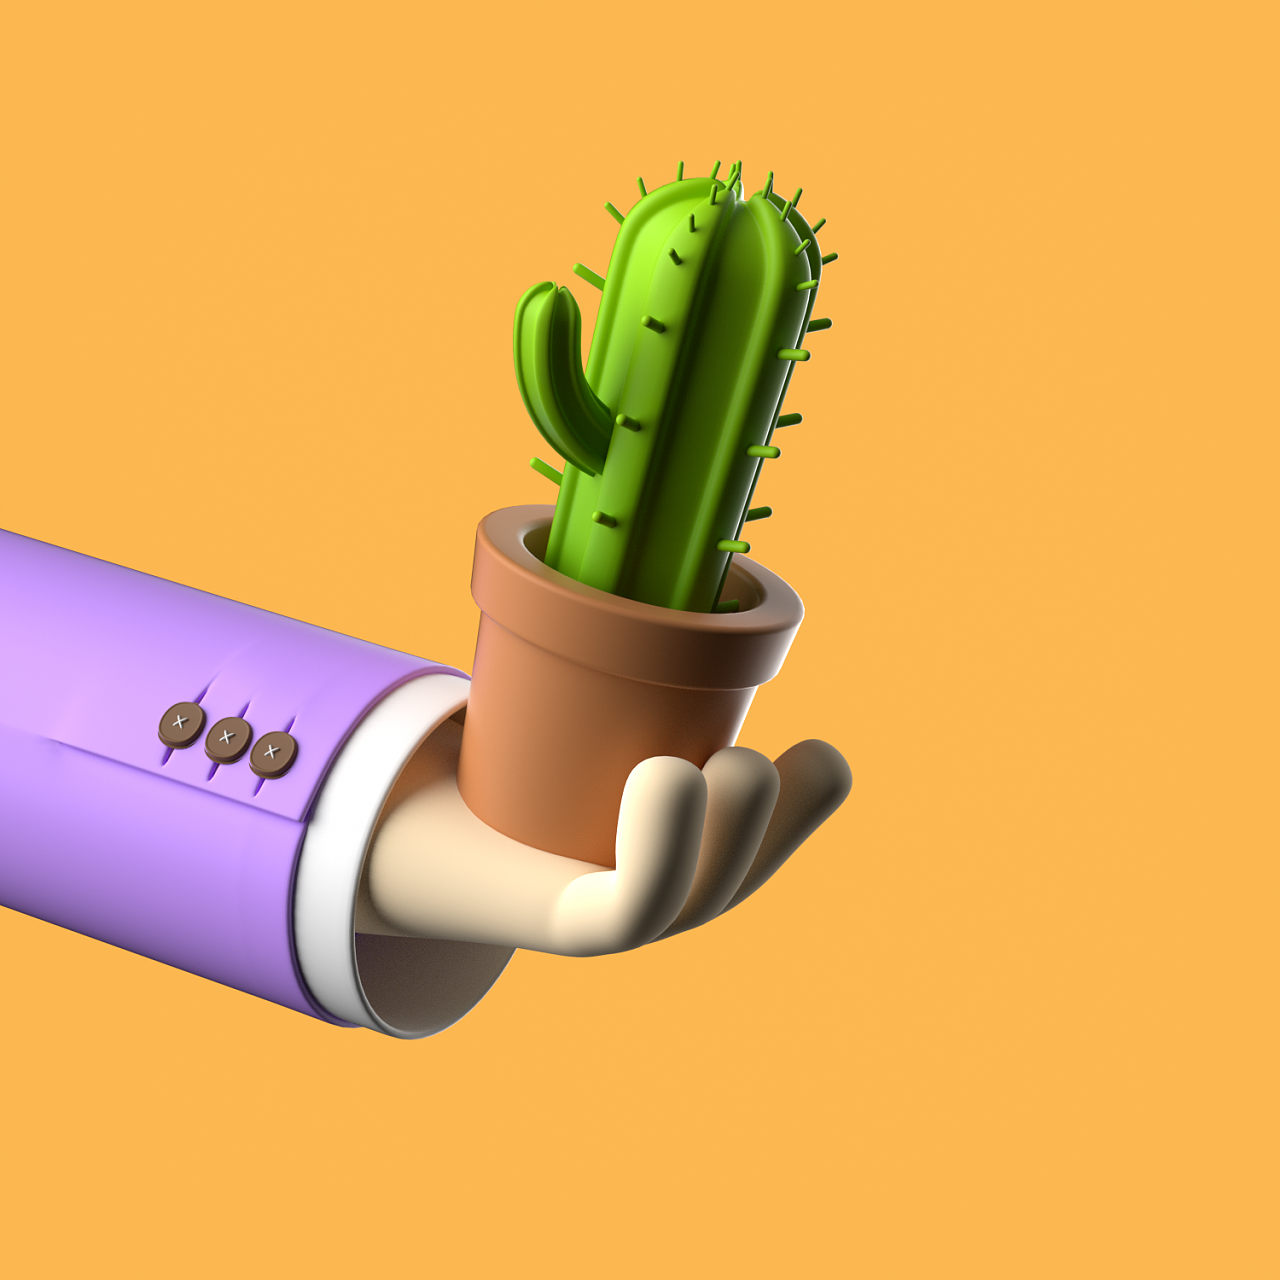 3D Illustrations collection